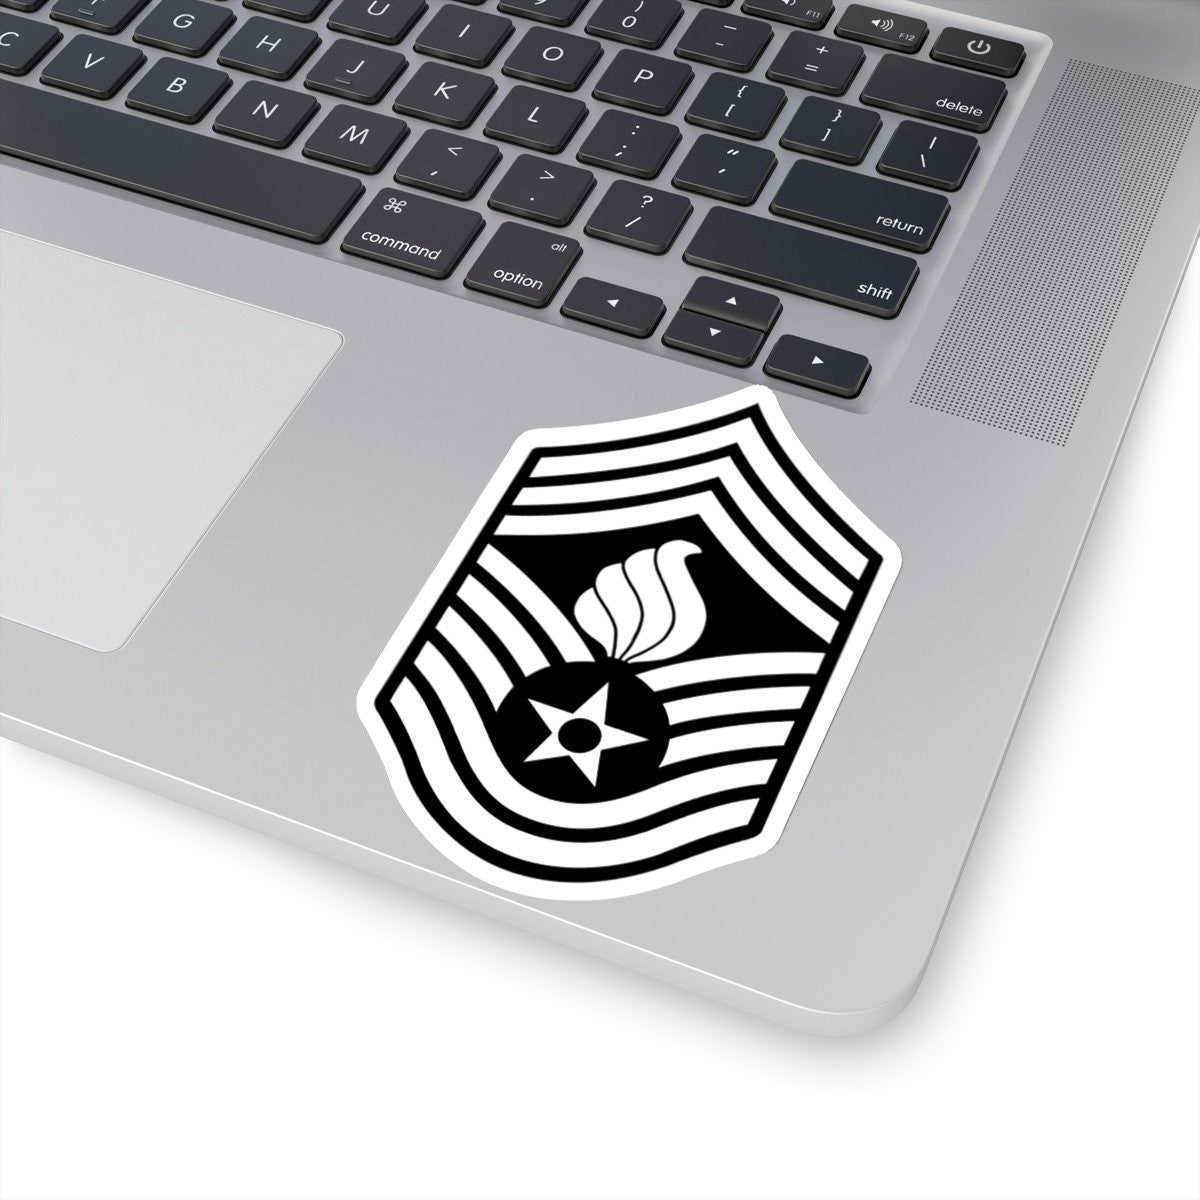 USAF AMMO Chief Master Sergeant CMSgt E-9 Rank Black and White Kiss-Cut Vinyl Indoor Stickers